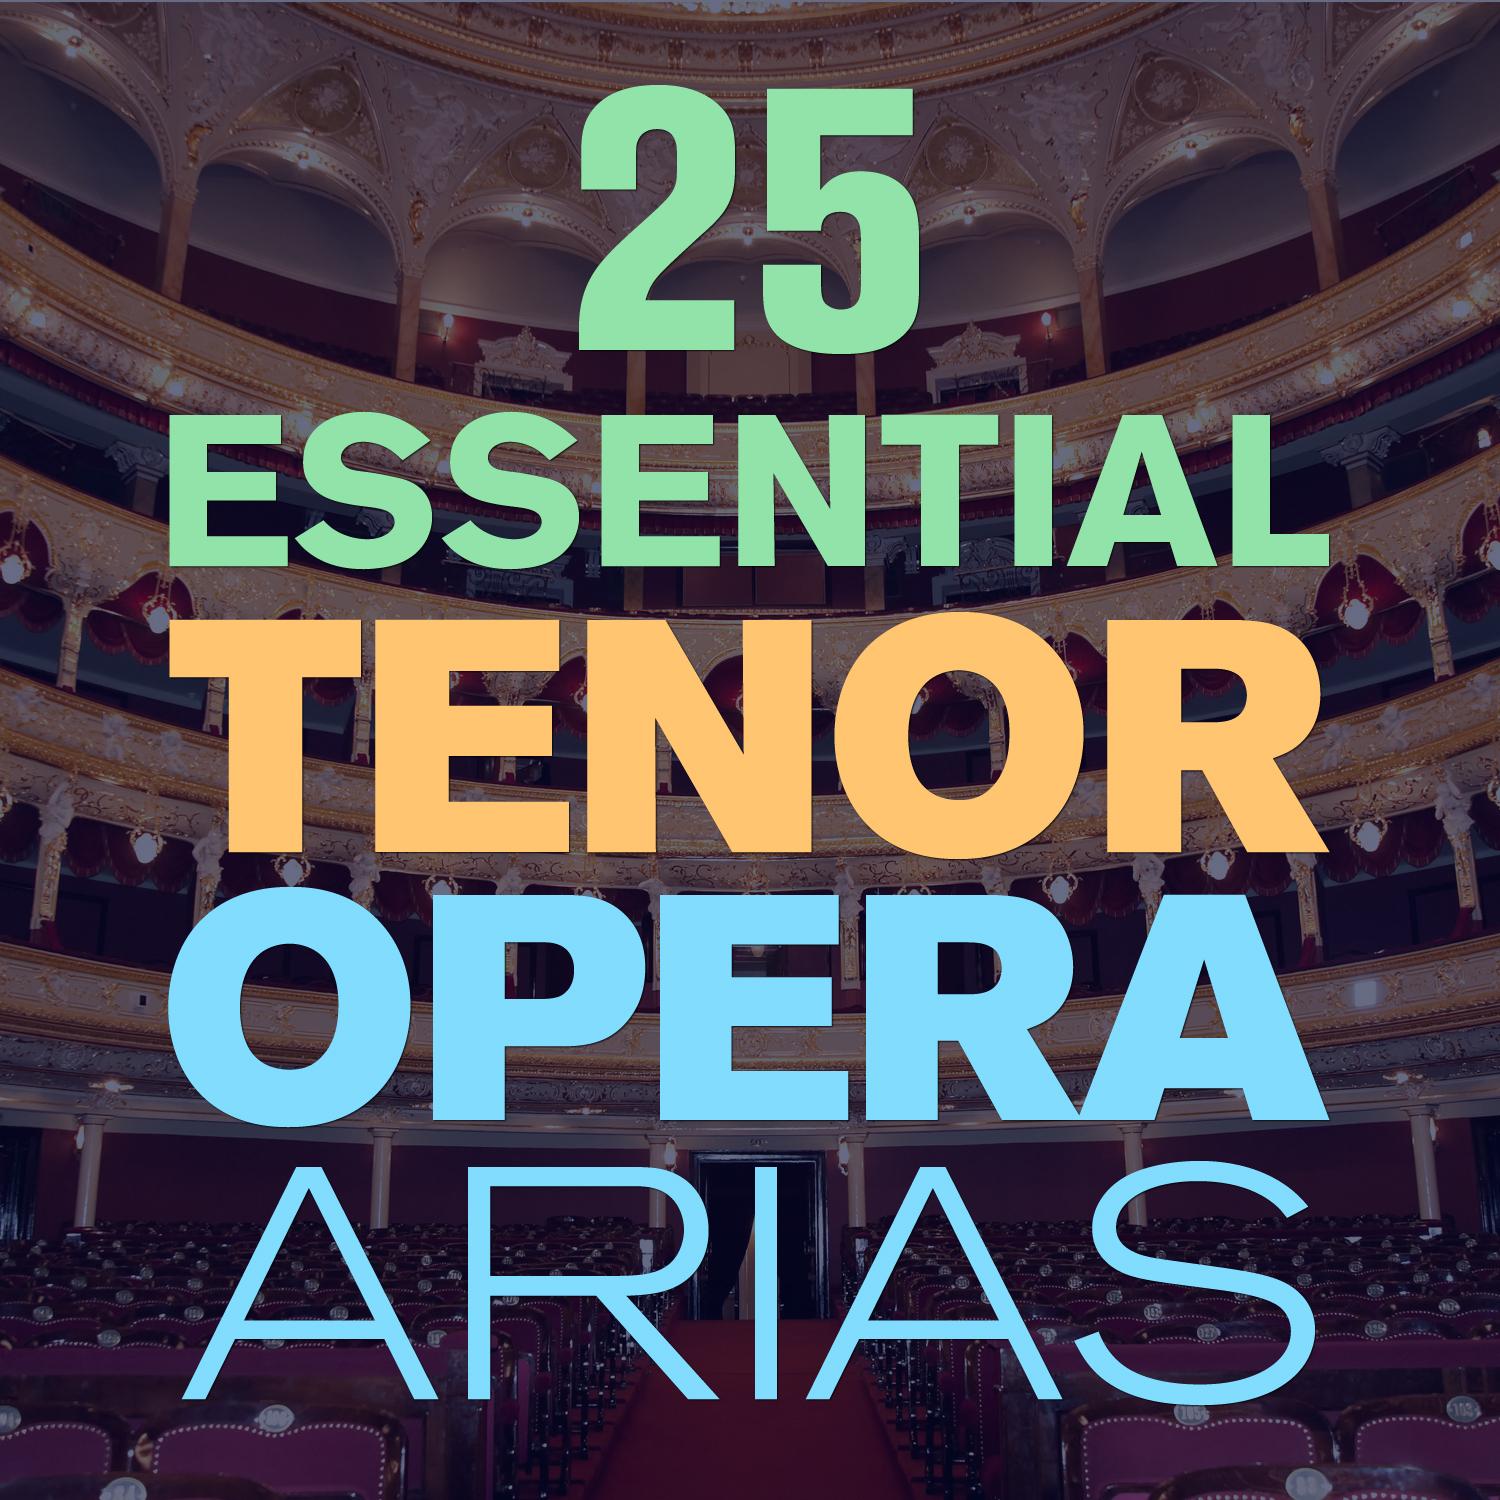 25 Essential Tenor Opera Arias, Songs & Duets with from Mozart, Puccini, Bizet, Verdi, Donizetti & More